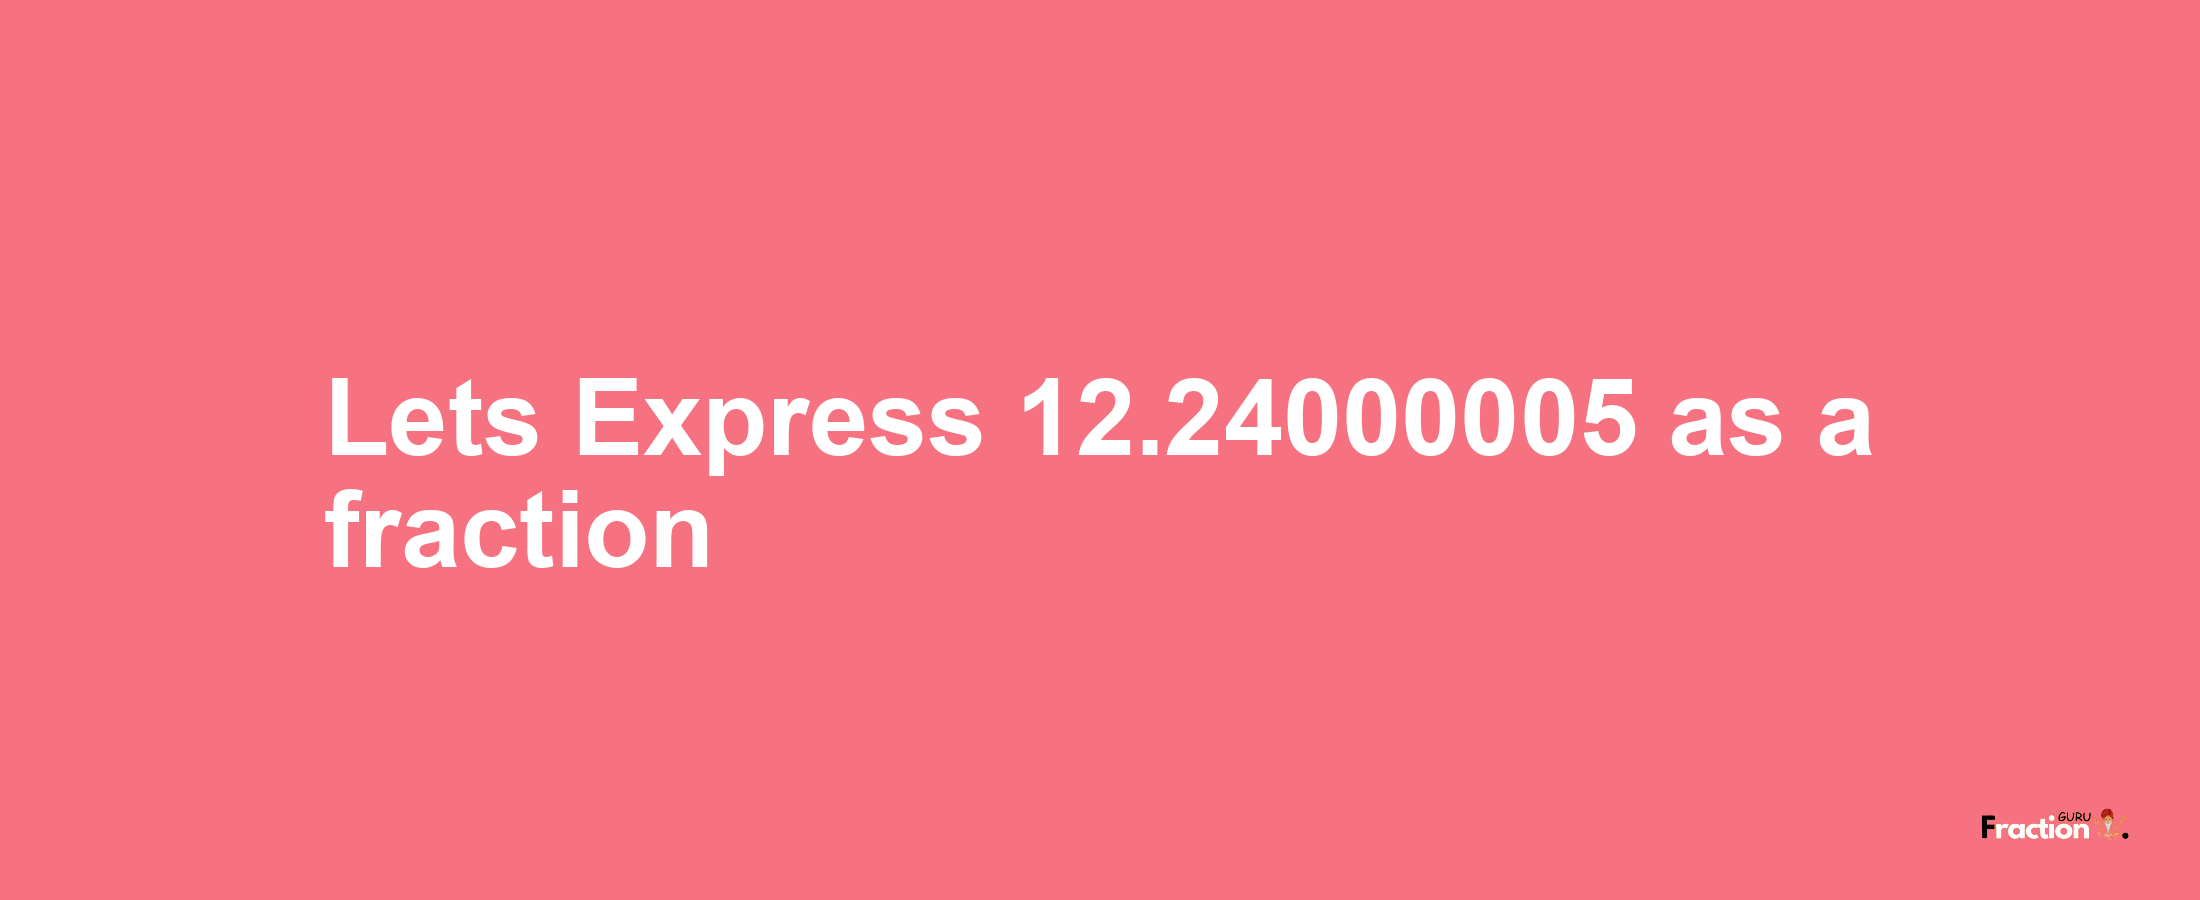 Lets Express 12.24000005 as afraction